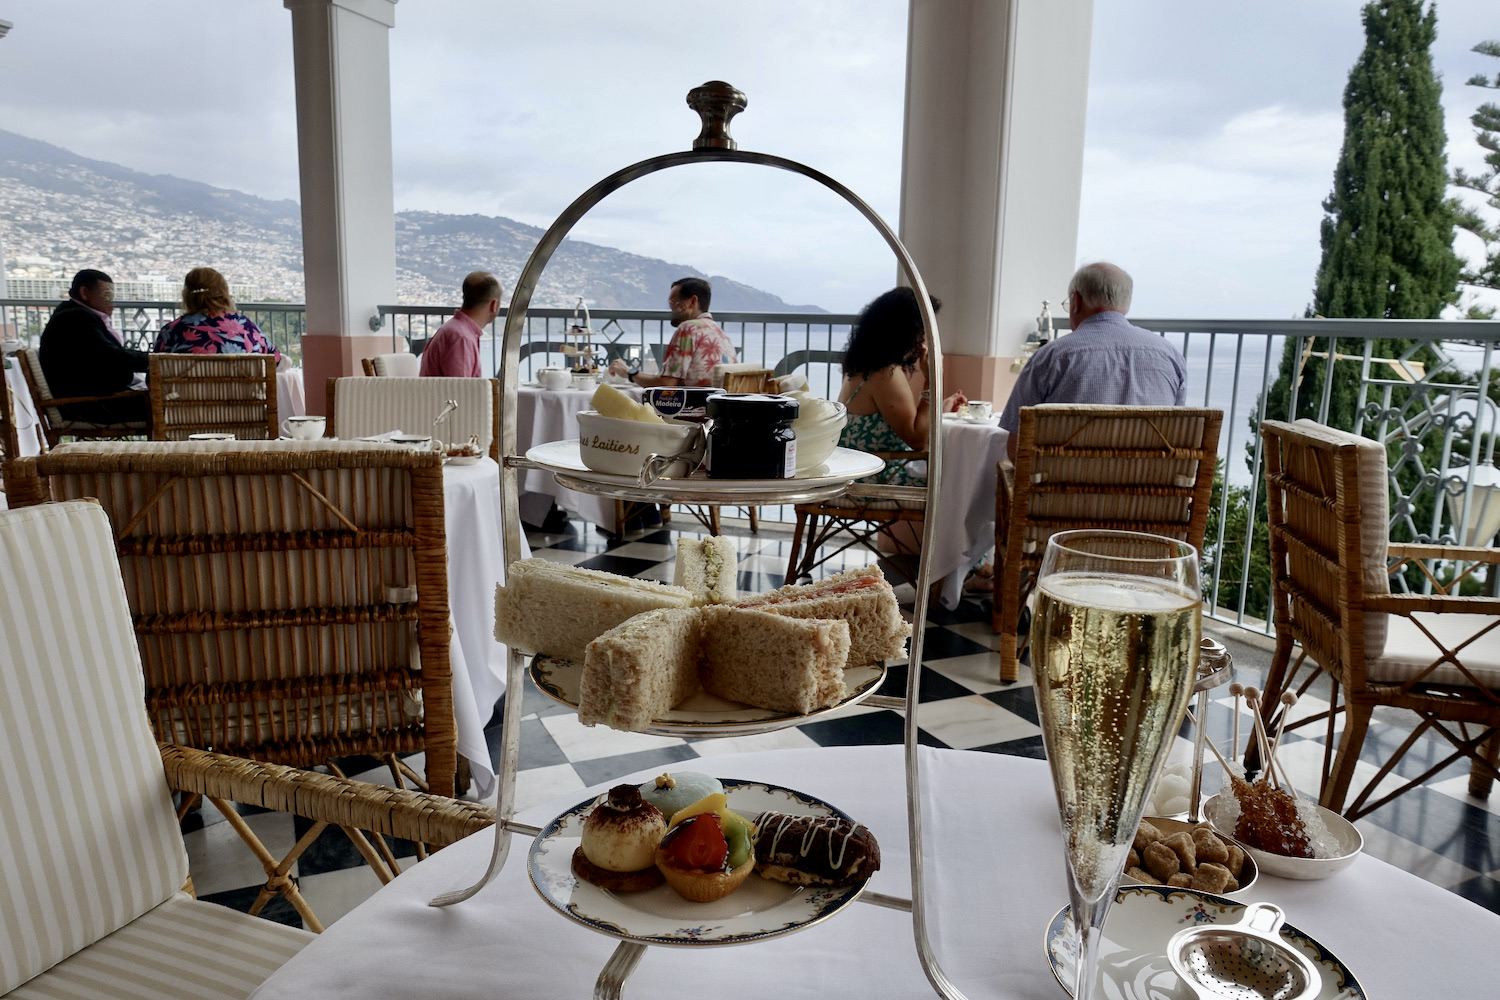 afternoon tea at Reid's Palace in Madeira